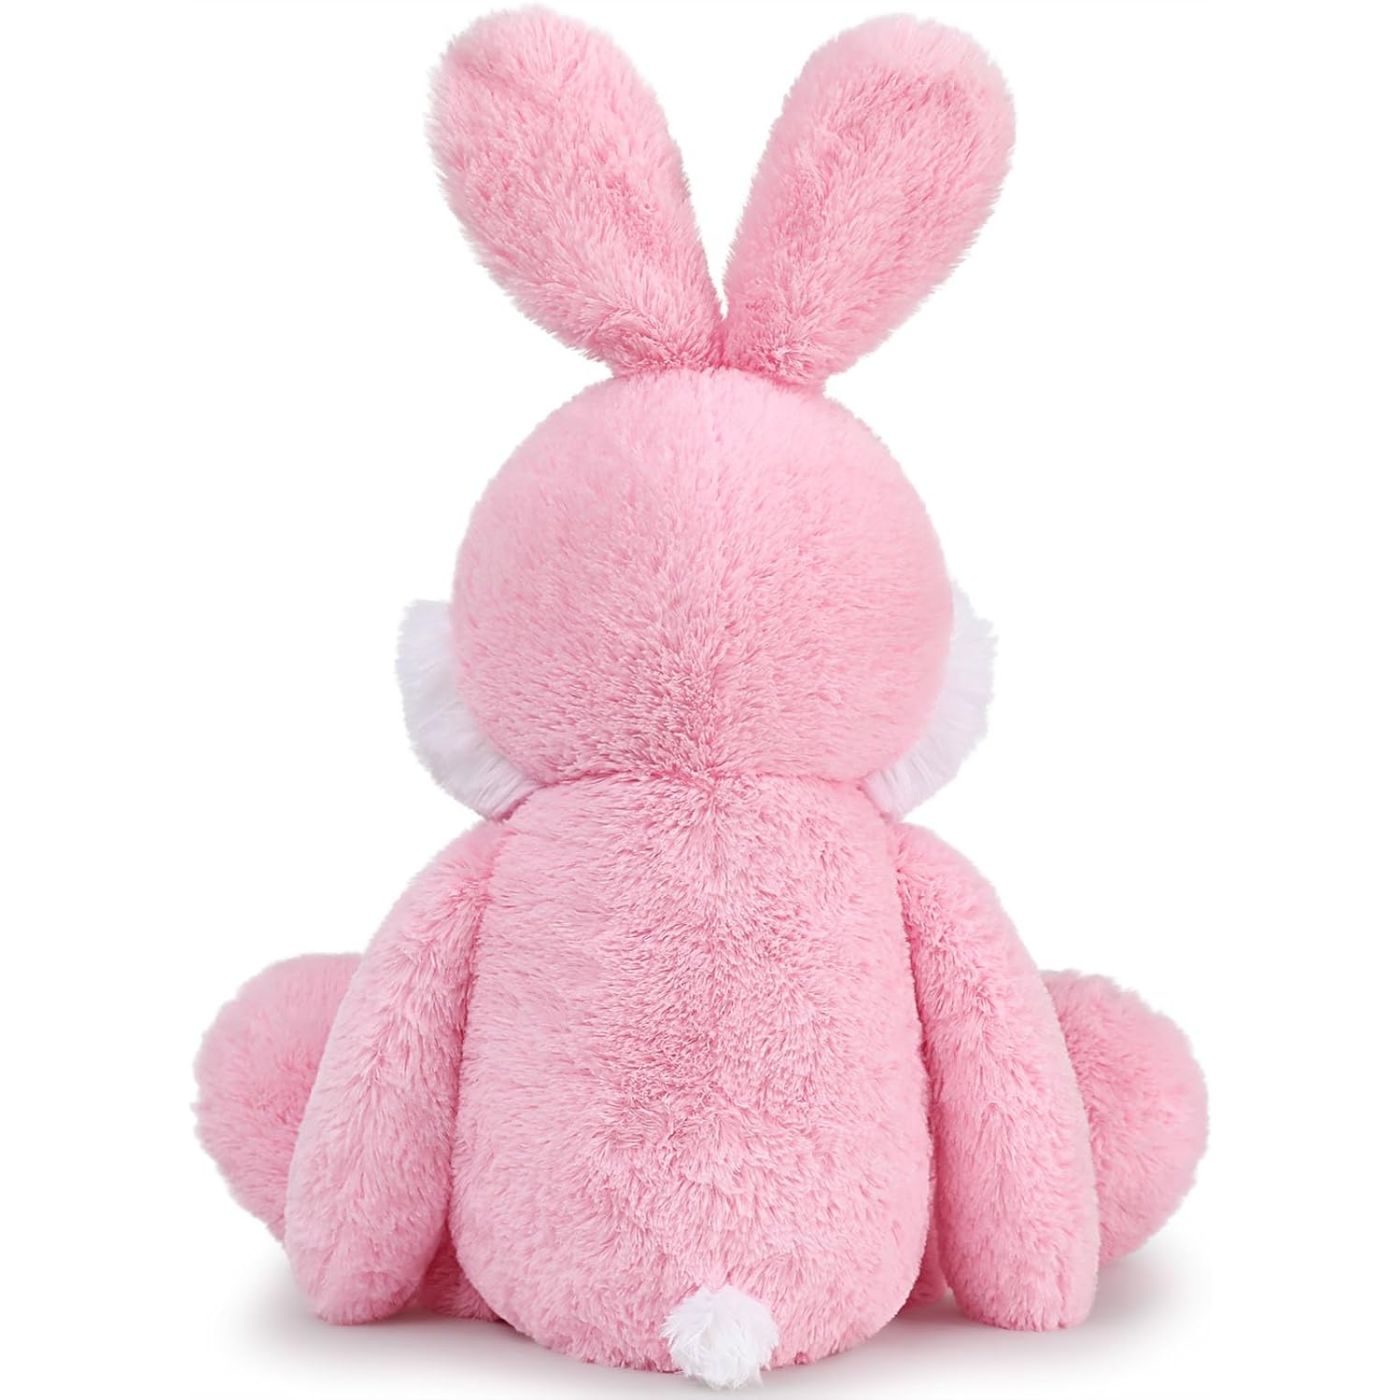 Giant Rabbit Plush Toy, Pink, 31.5 Inches